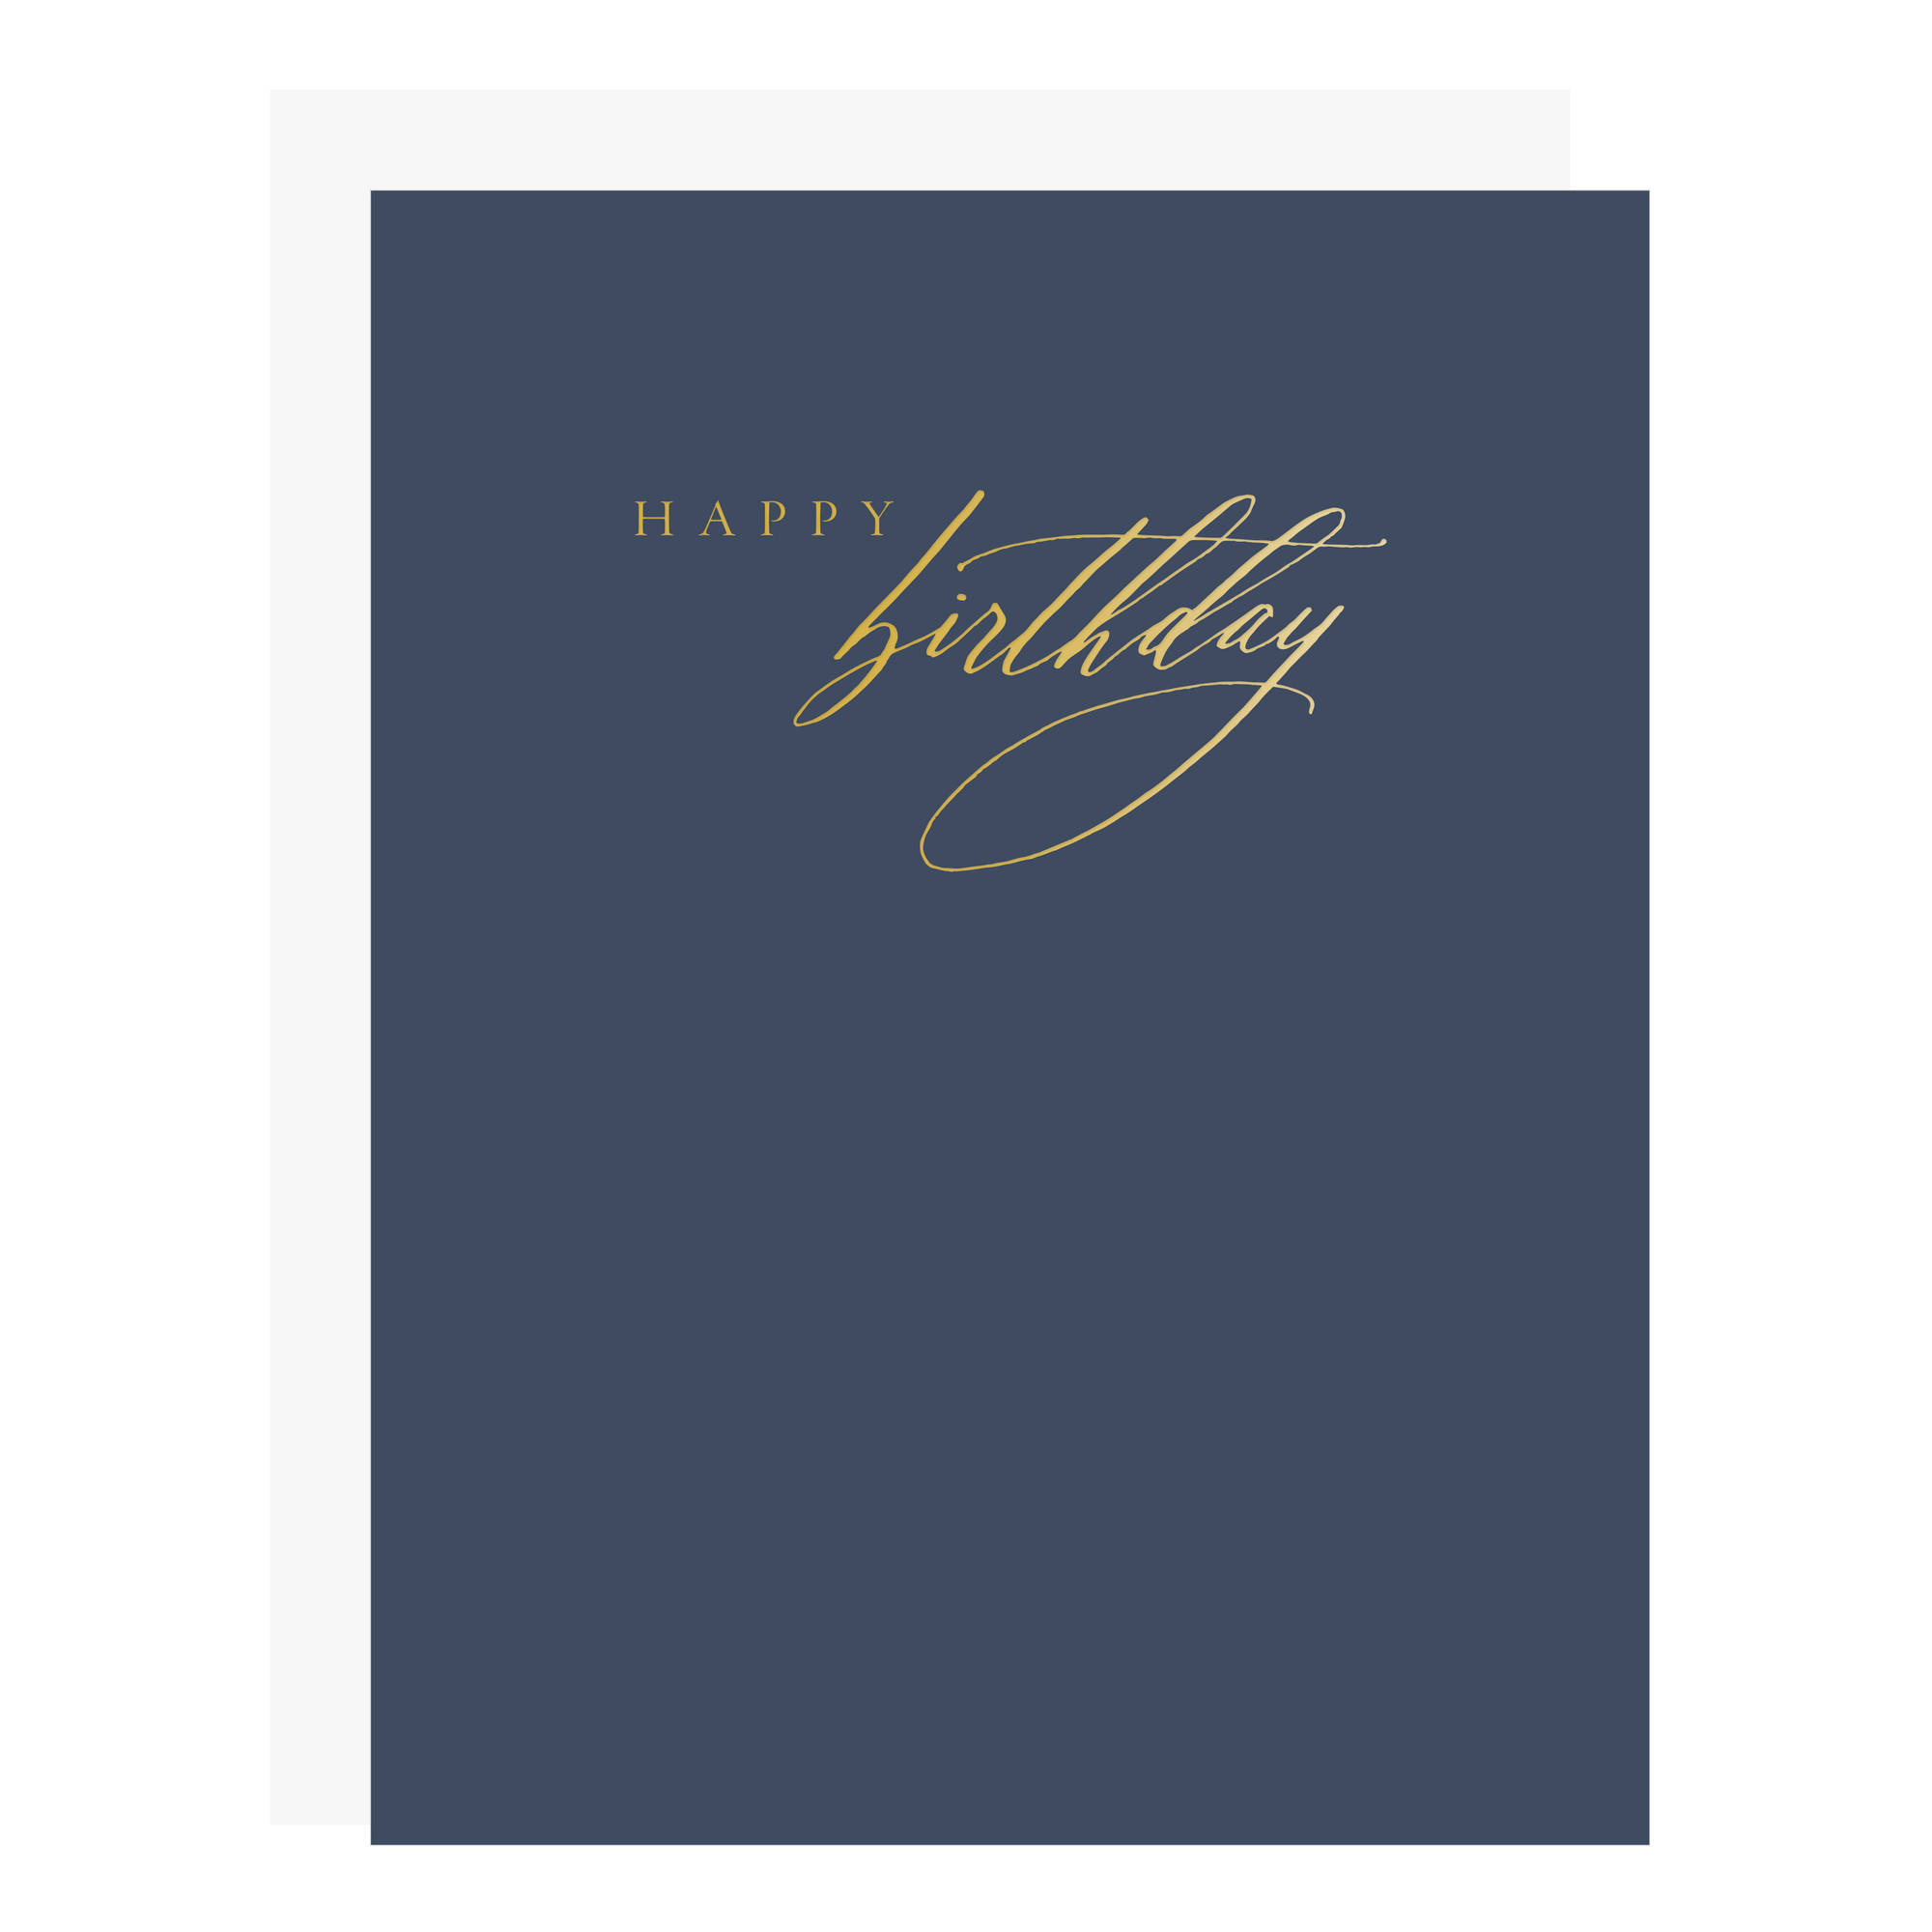 "Navy and Gold Birthday" card, letterpress printed by hand in gold foil.